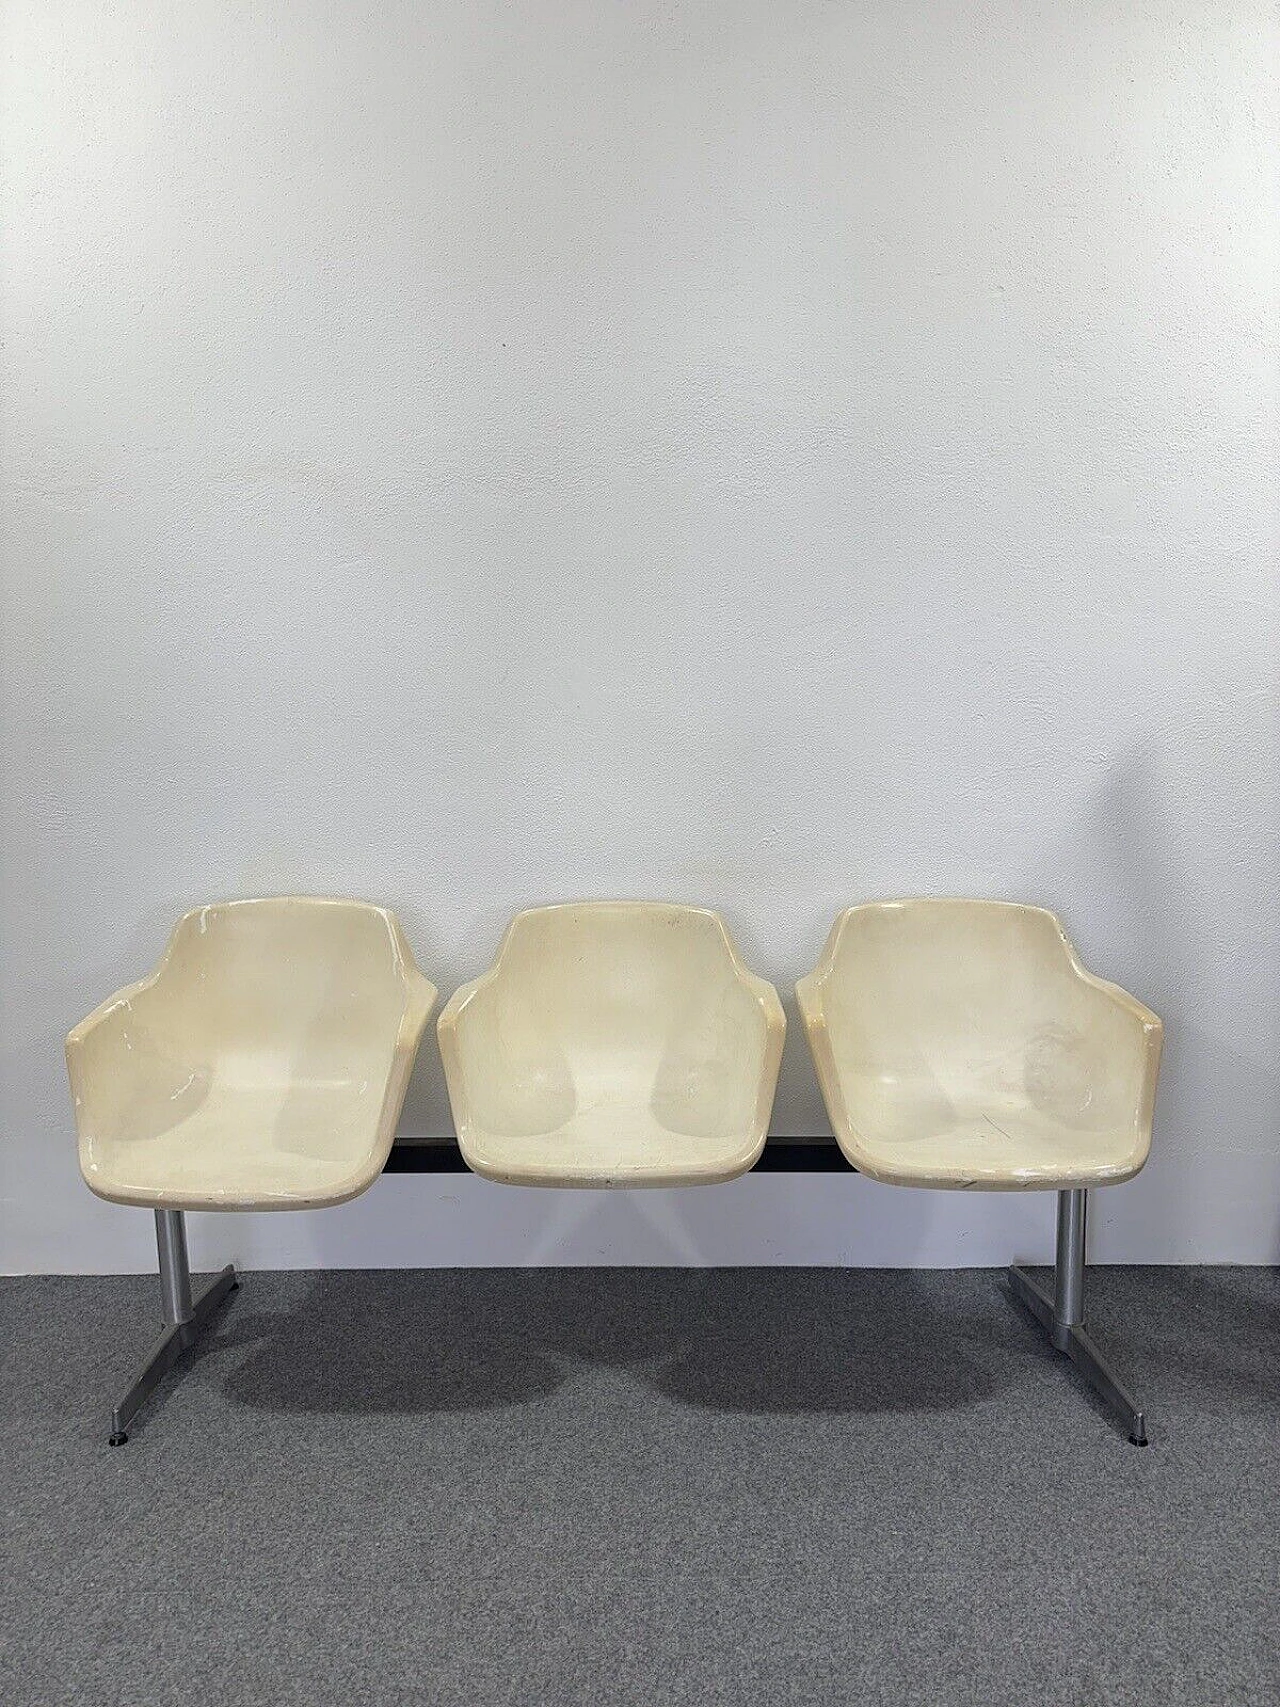 Tandem airport bench by Charles & Ray Eames for Herman Miller 3